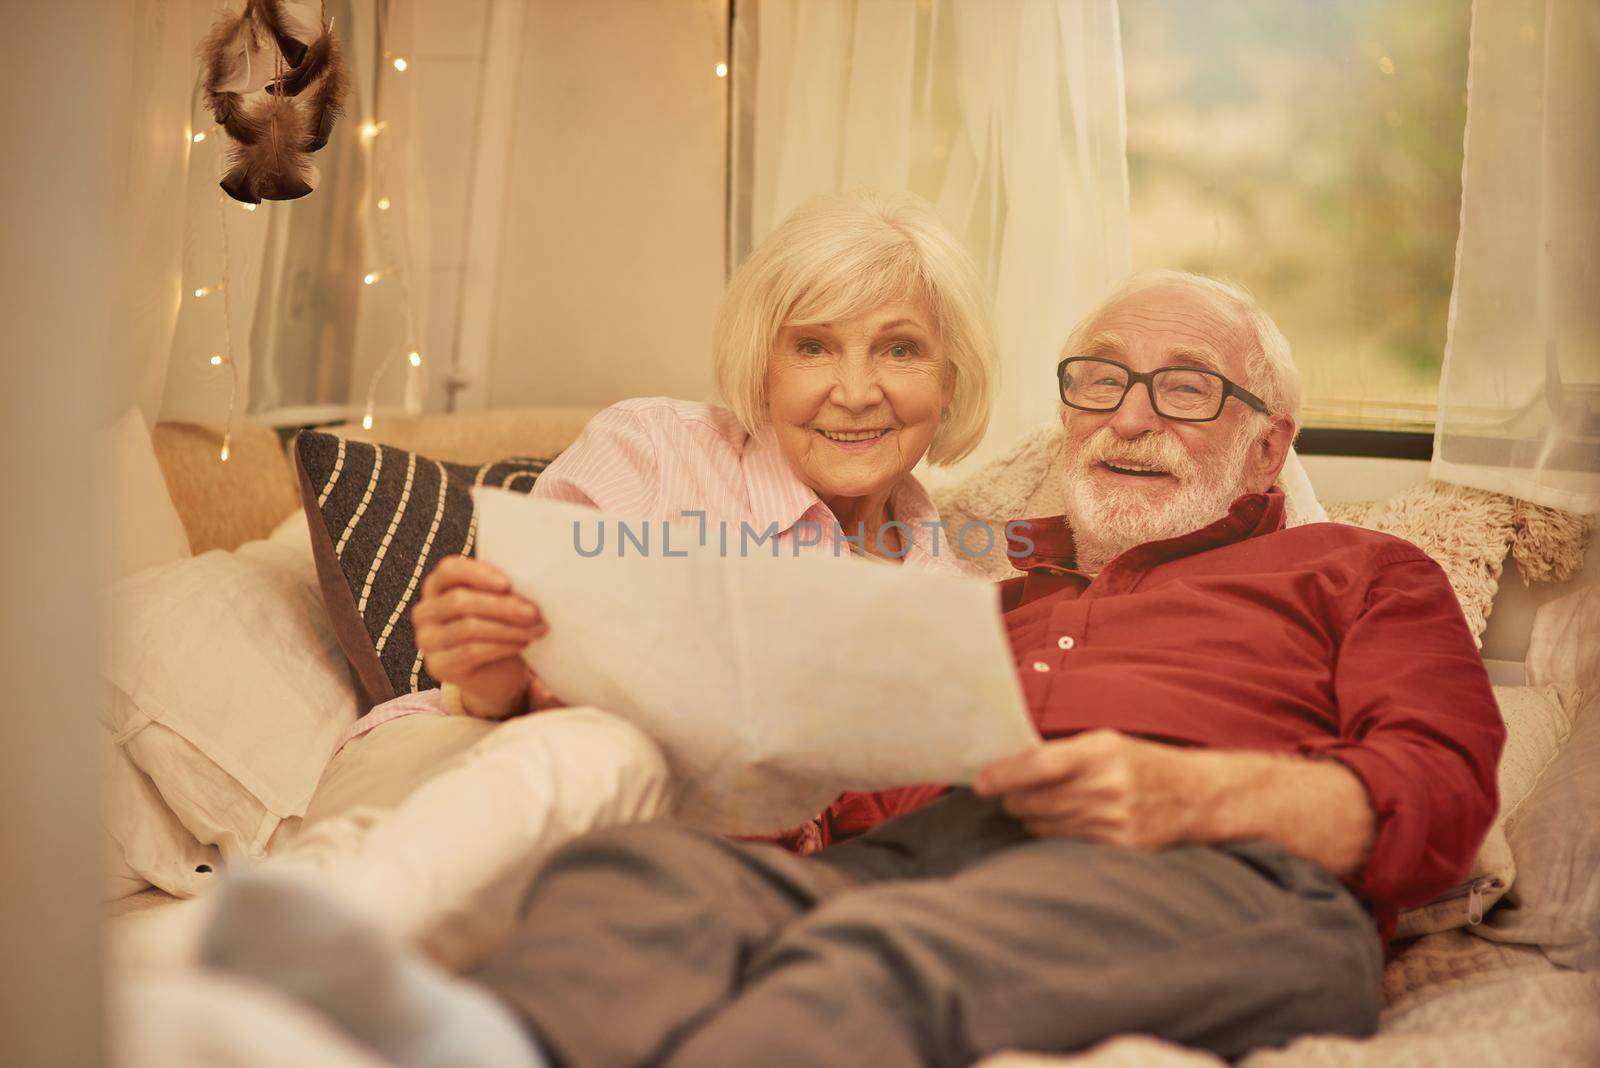 Smiling elderly man and woman lying on couch in camper van while holding map and looking for a new route. Travel concept